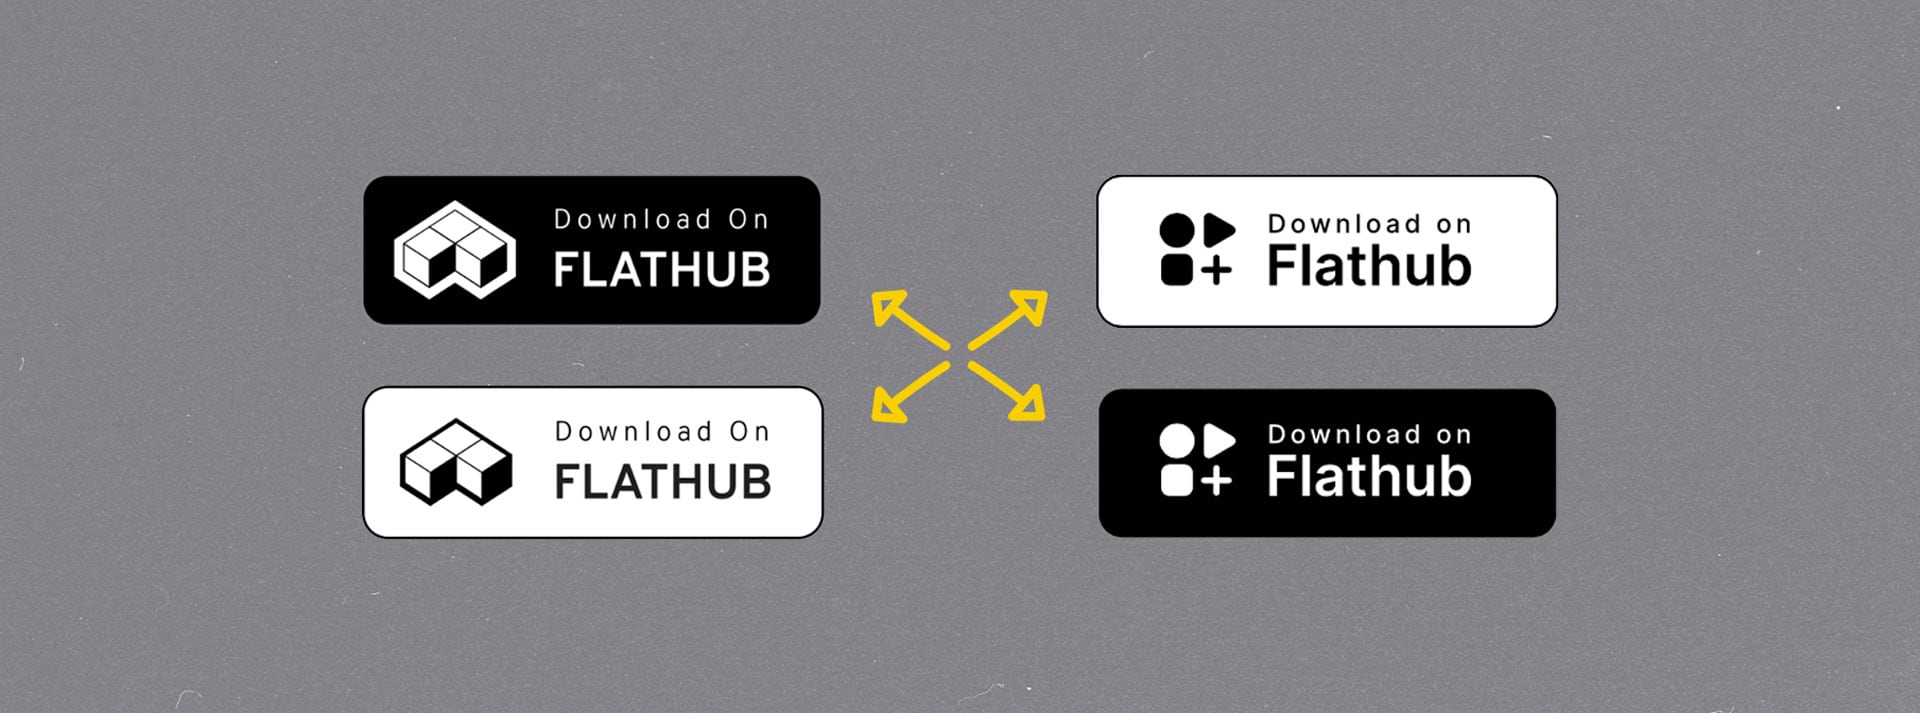 download buttons for flathub